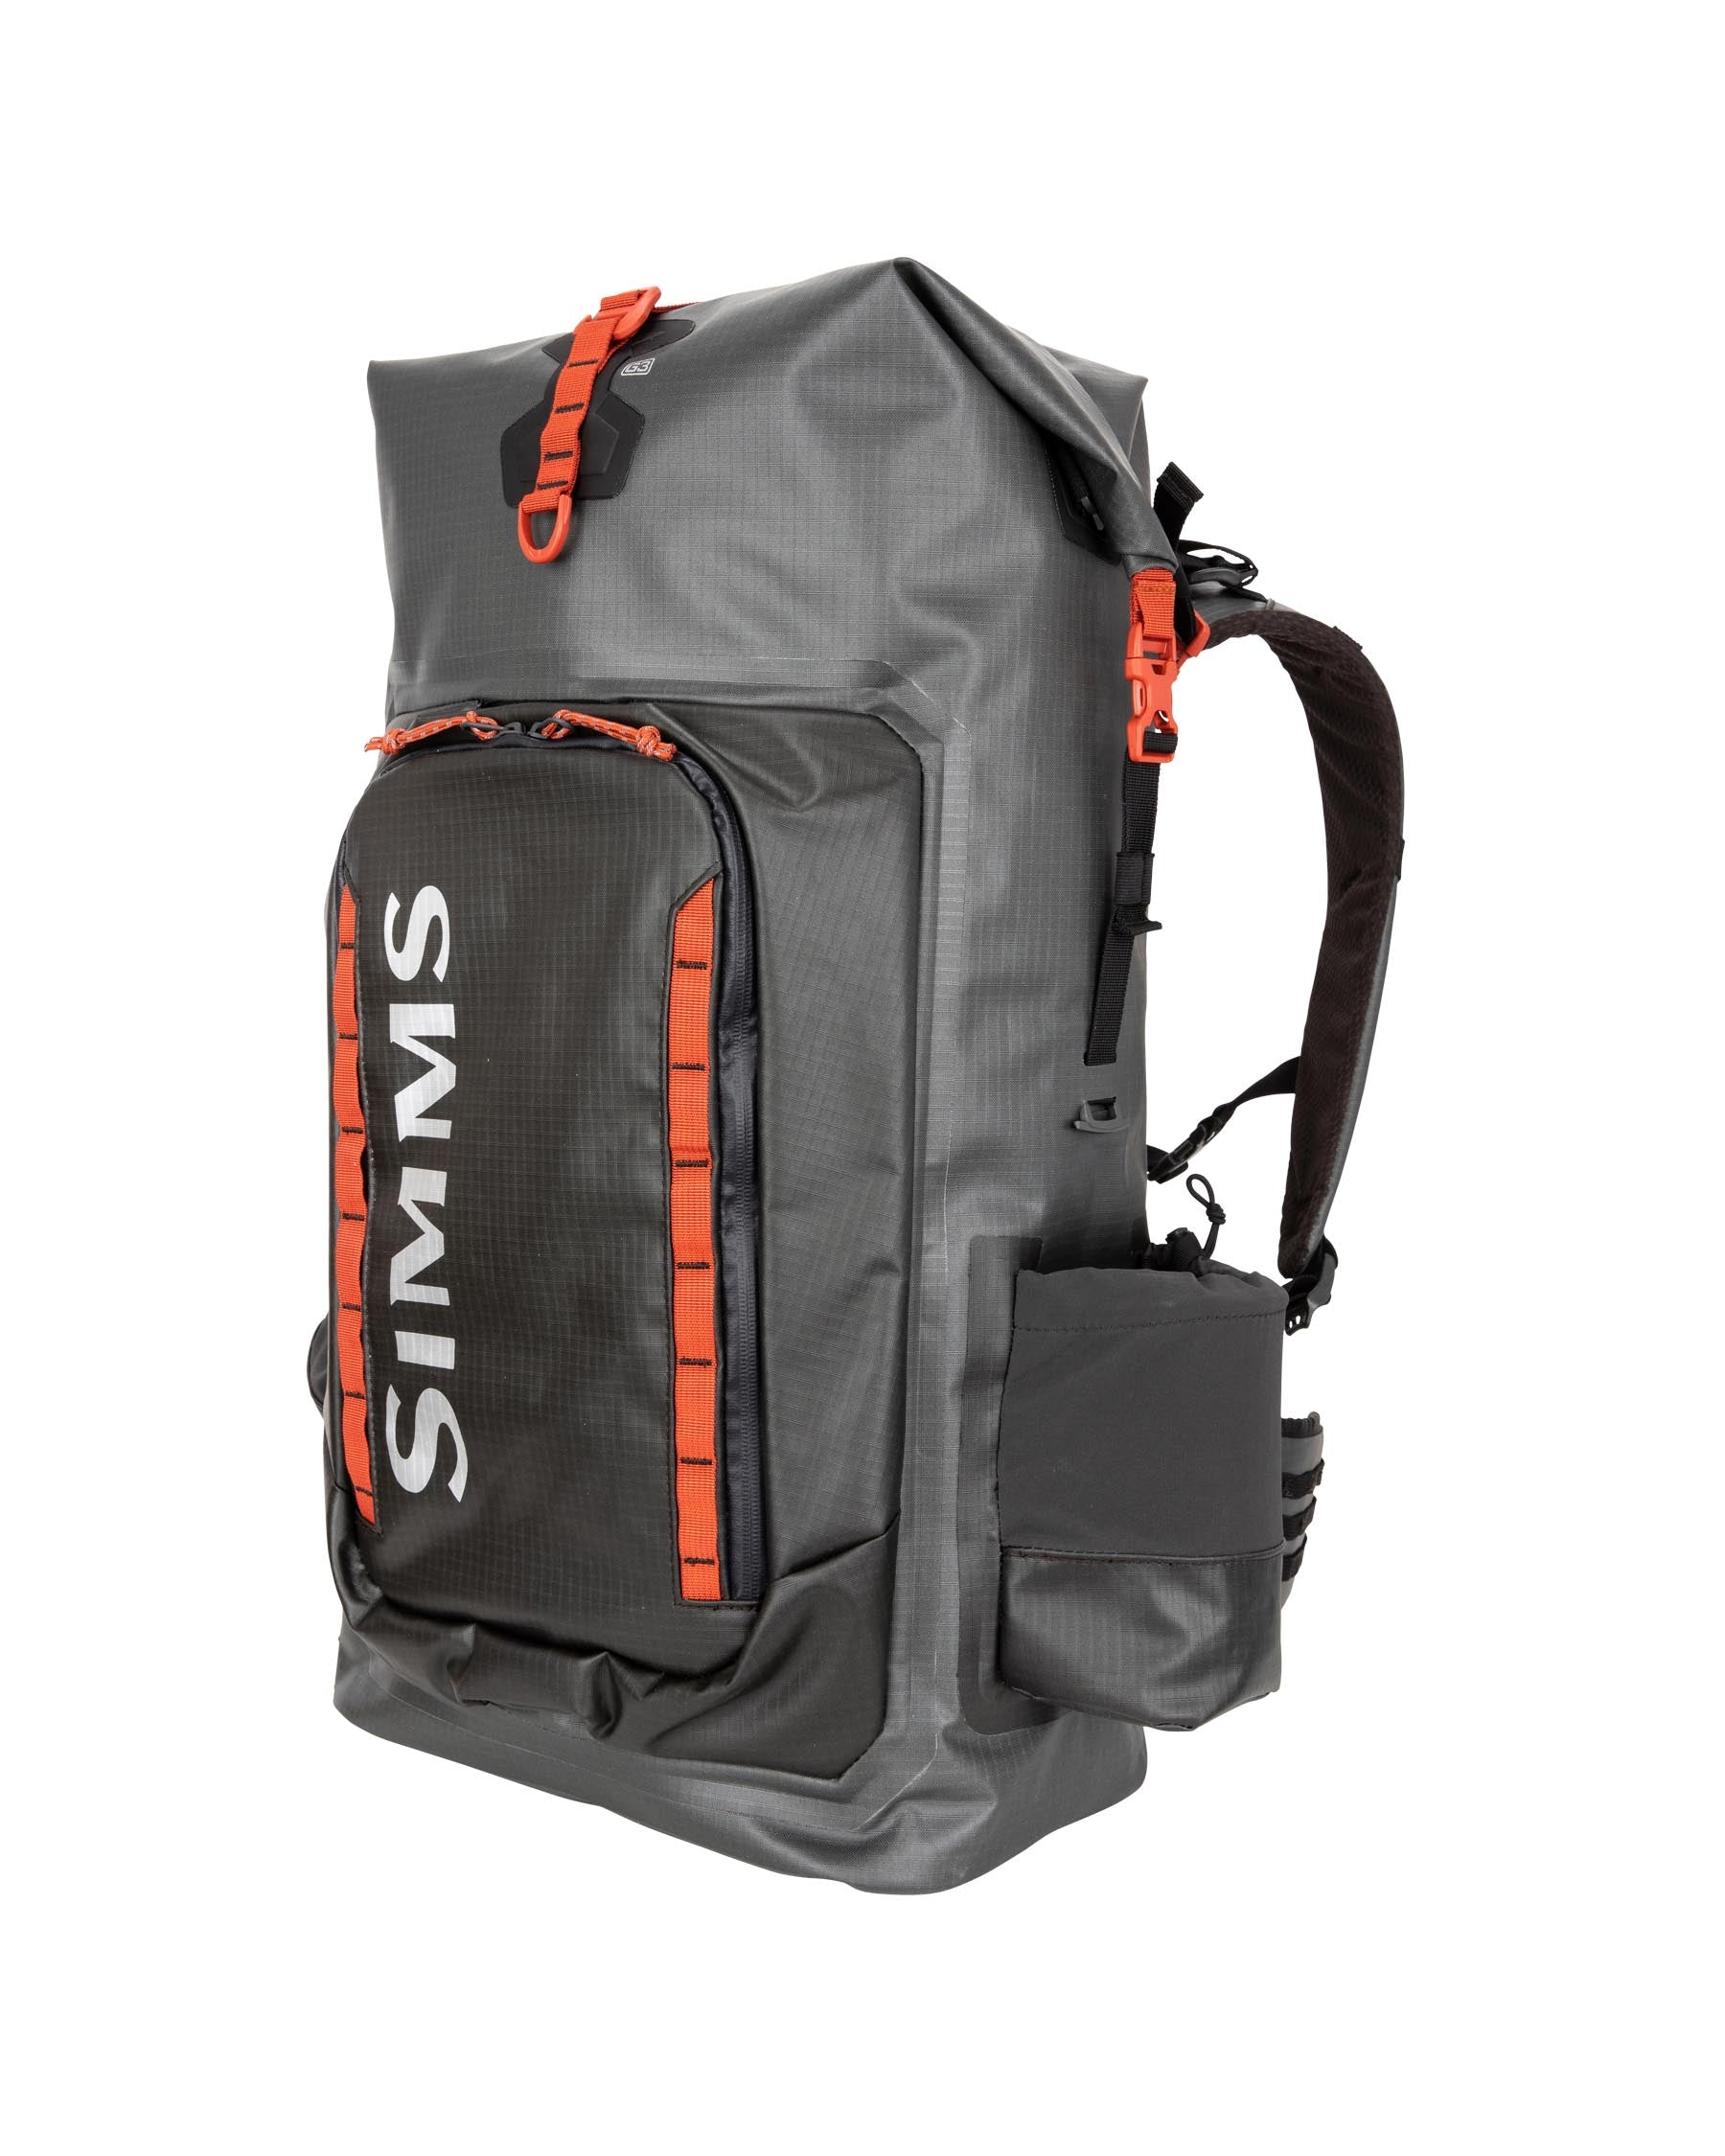 SIMMS G3 Guide Backpack